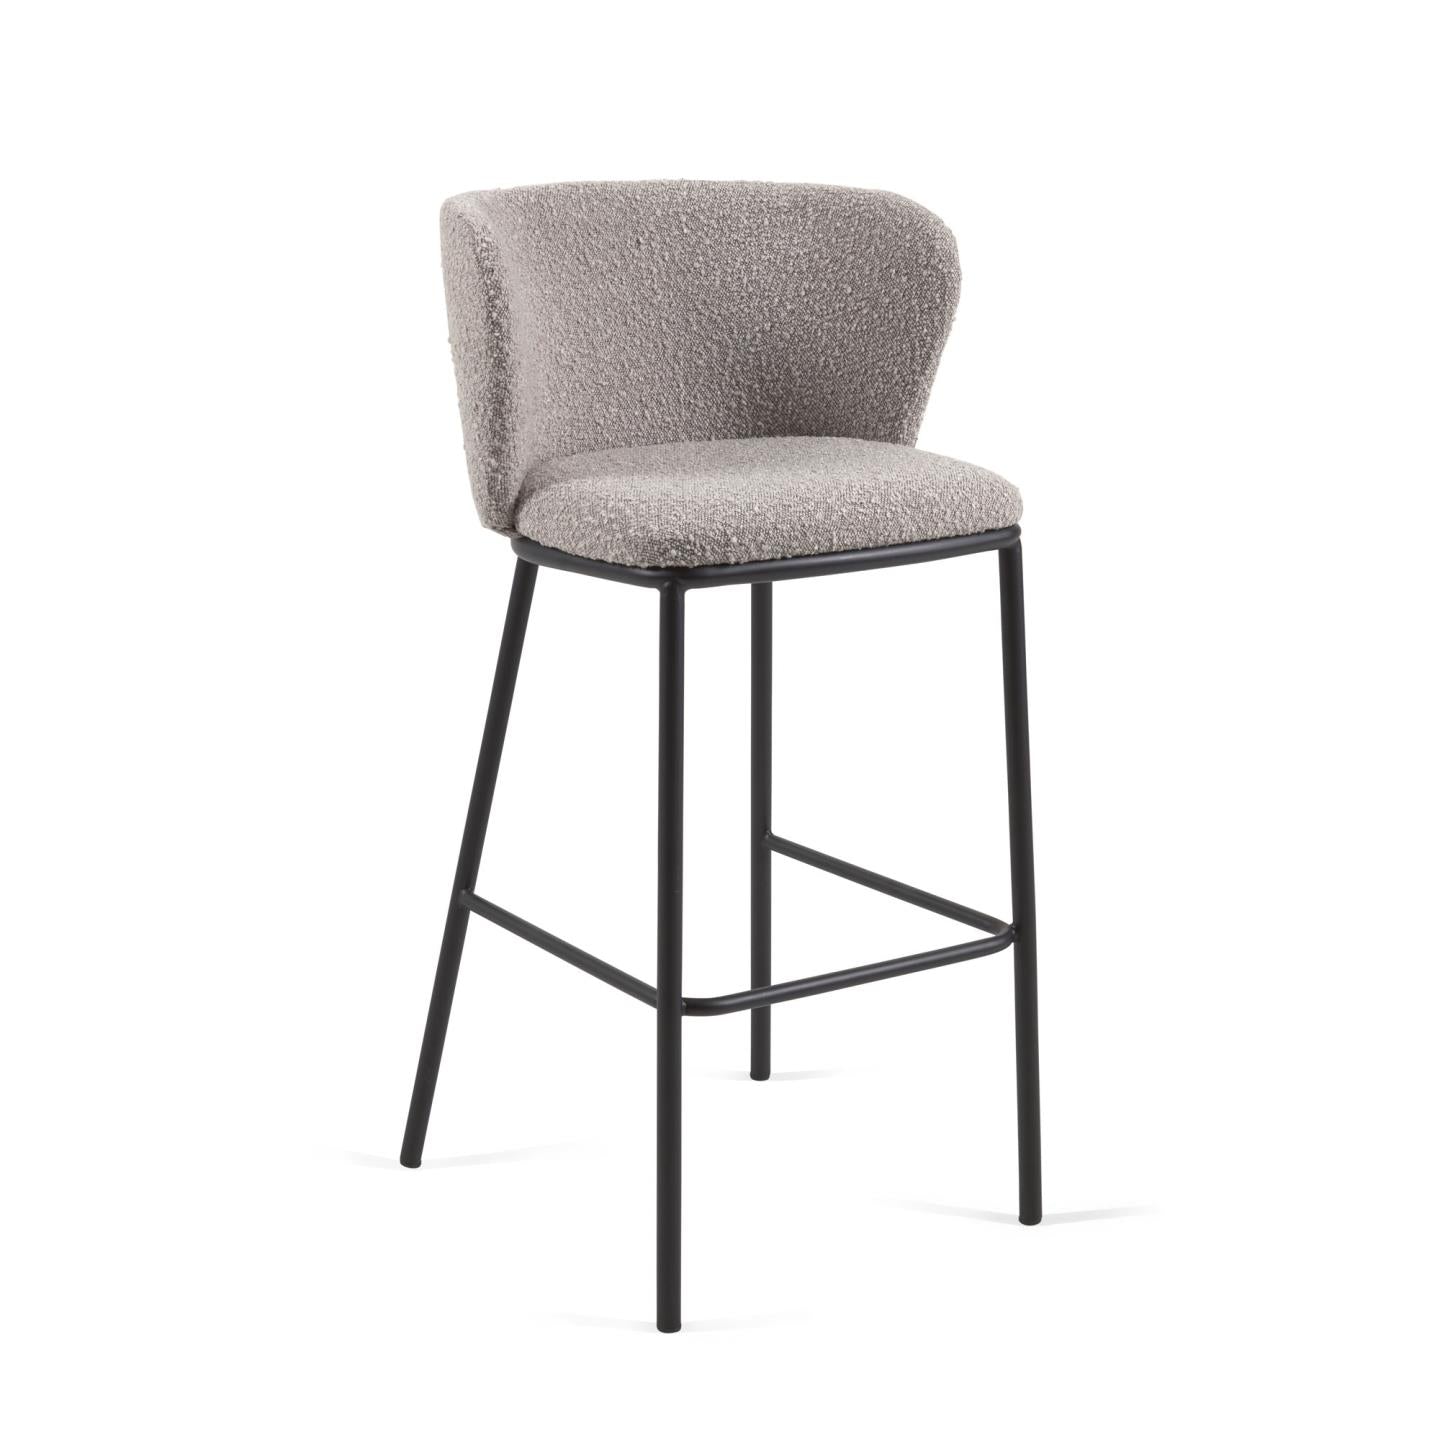 Ciselia stool with light grey shearling and black metal, height 75 cm